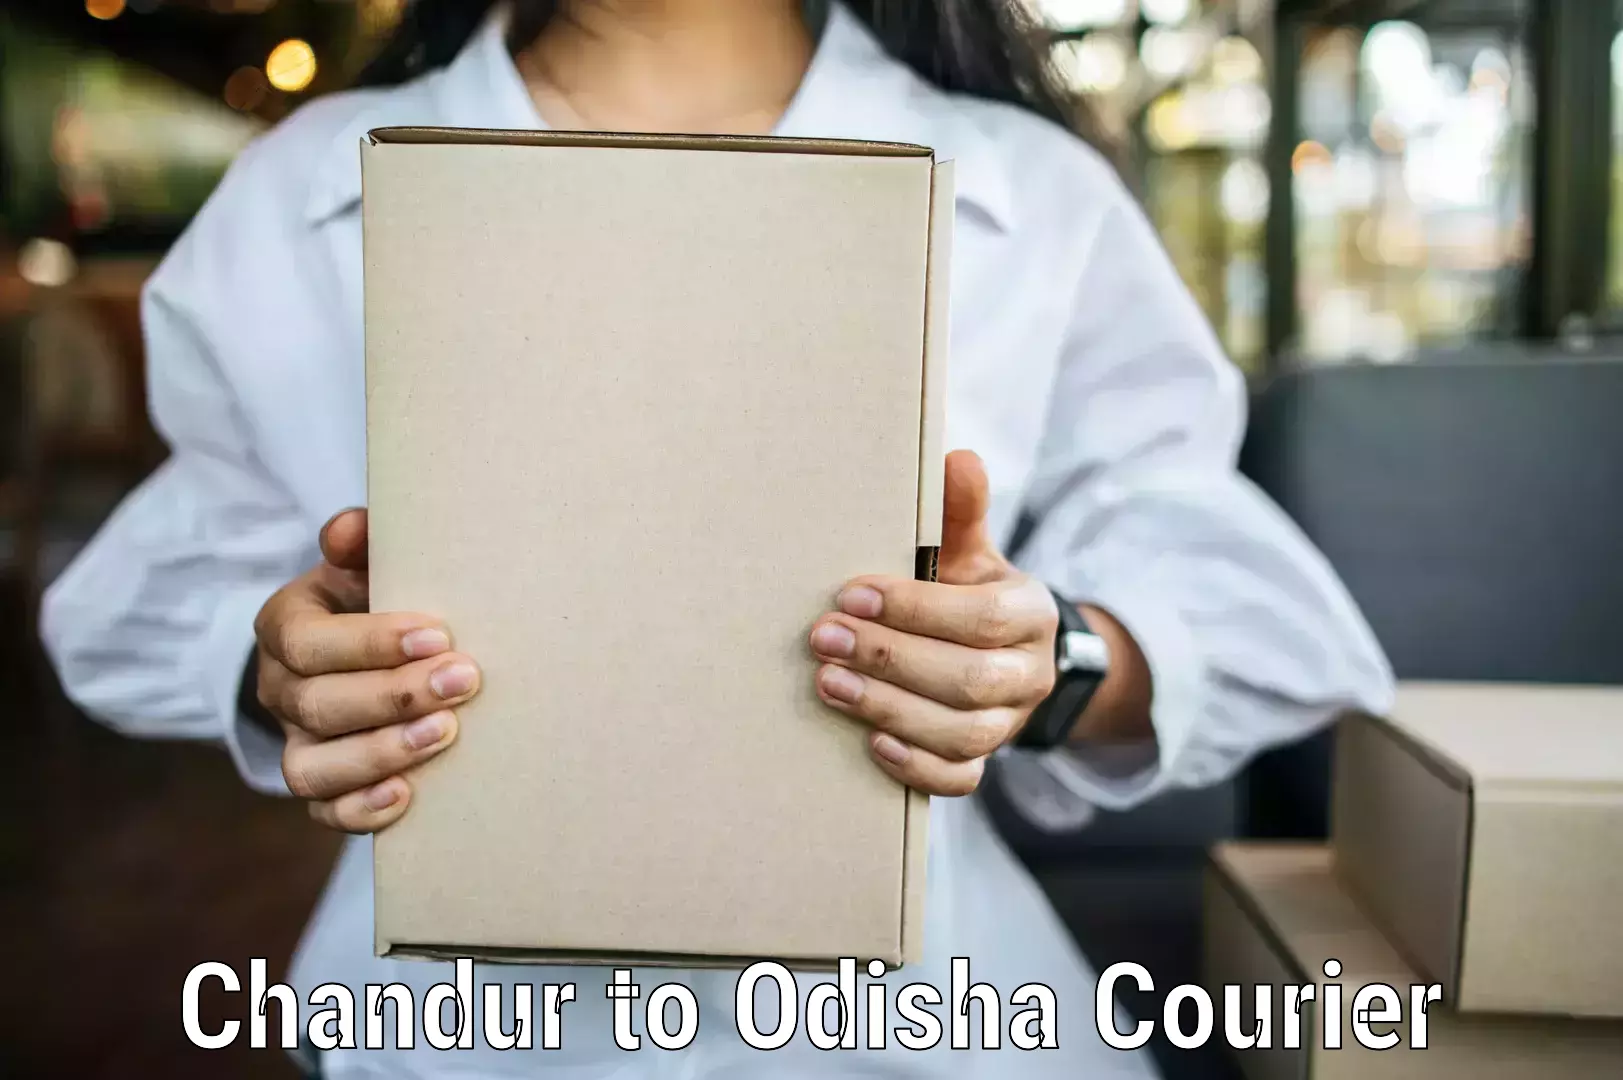 State-of-the-art courier technology Chandur to Nabarangpur